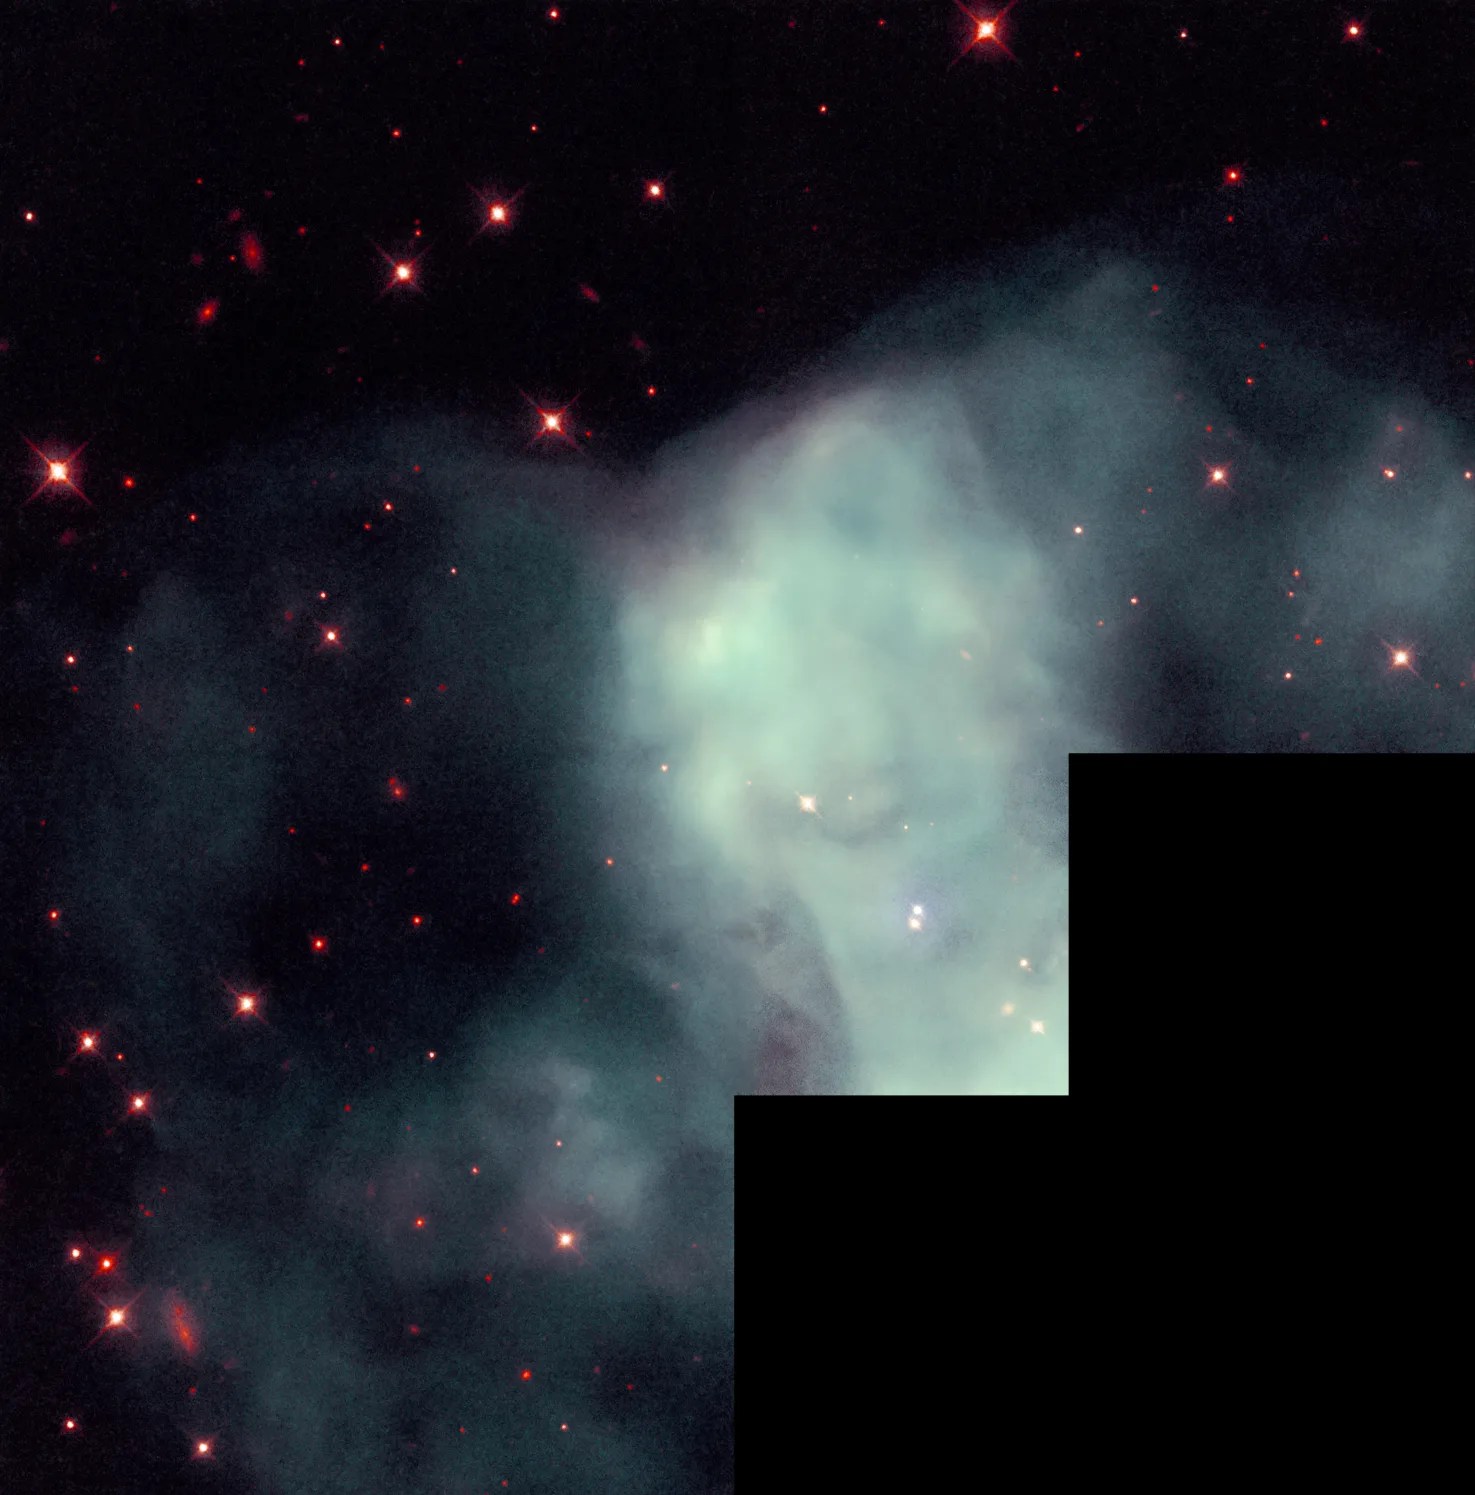 A hazy cloud of pale green covers the center of the image, against black space dotted with reddish stars. A stair step region of black at the lower right shows where there is no Hubble data.